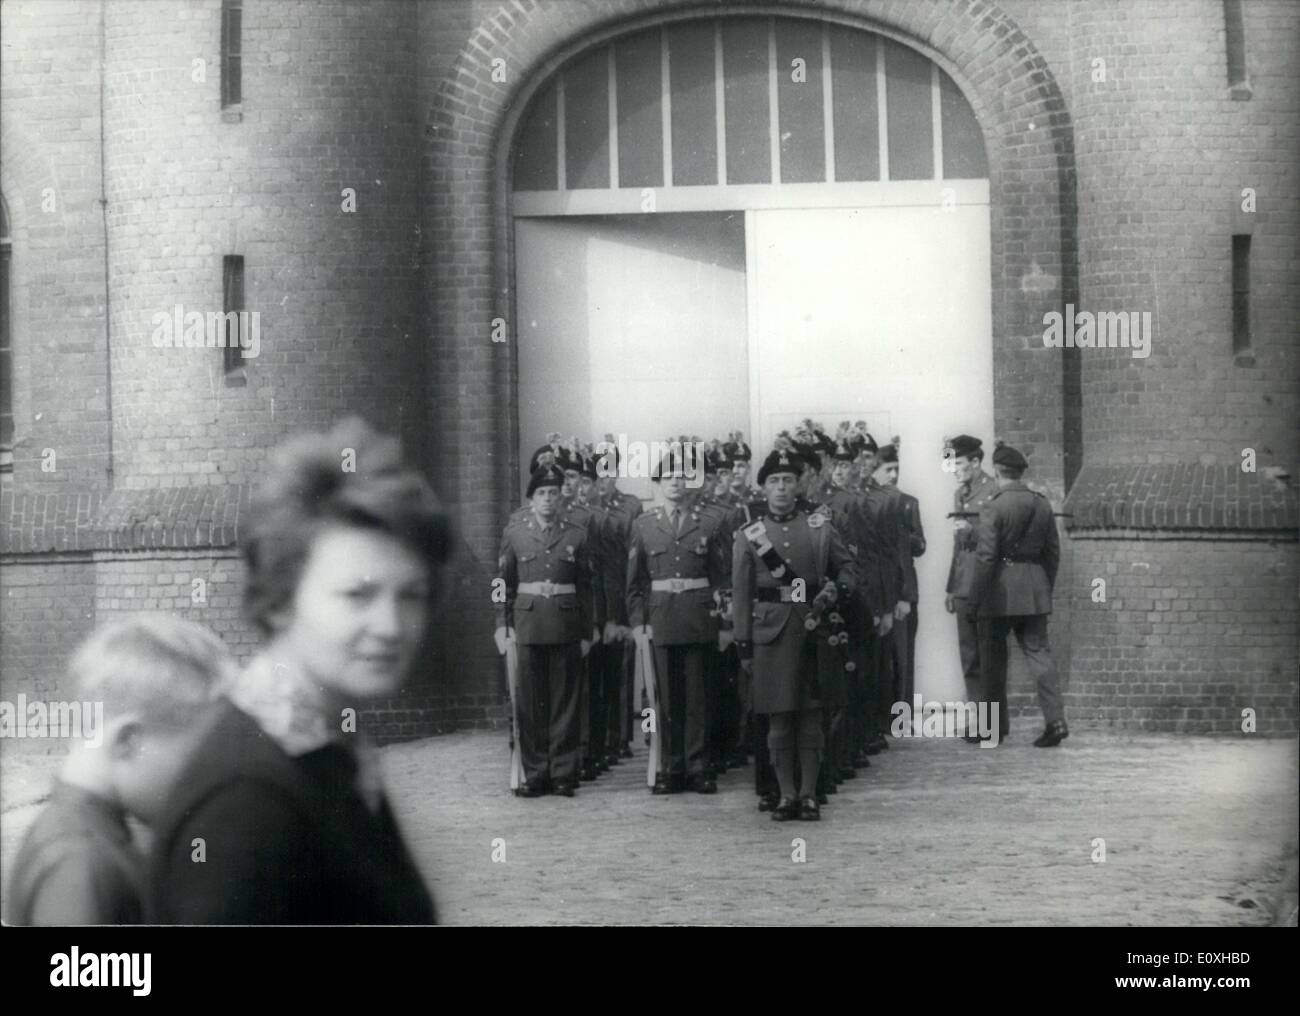 Oct. 10, 1966 - Wake up changing in Spandau Prison A new-wake up changing took place at Spandau prison after leaving of Speer and Schirach. The new crew has to wake for only one prisoner now, the 71 years old Rudolf Hess. But maybe it was a moment of history for the British soldiers when they leaved the prison, it was maybe their last wake service. The Allies wants to talk next time, to find an other place for Hess. OPS: British Soldiers are leaving the prison in Spandau. Stock Photo